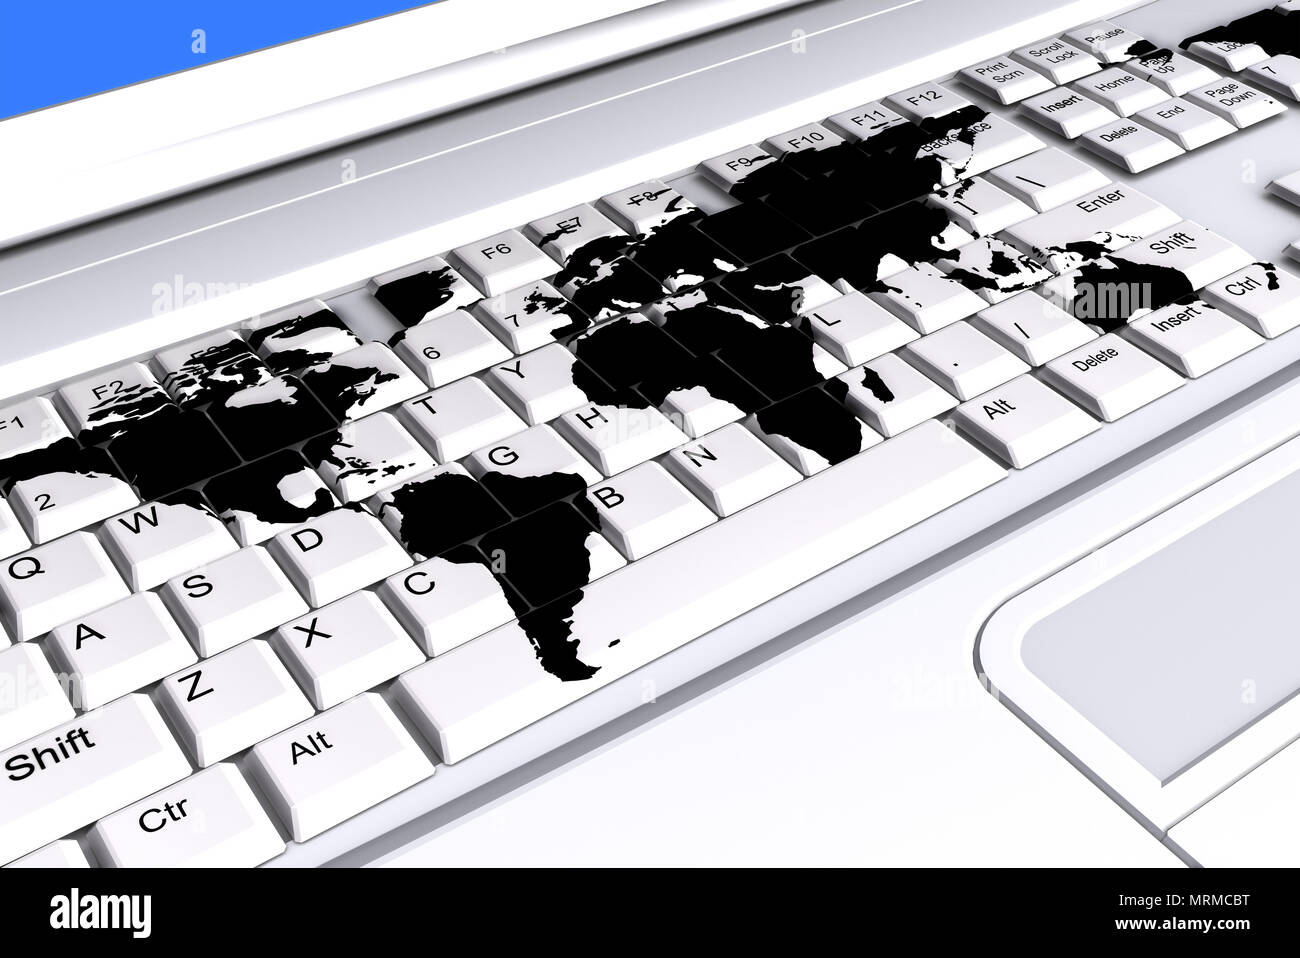 Laptop keyboard with a world map on the keys Stock Photo